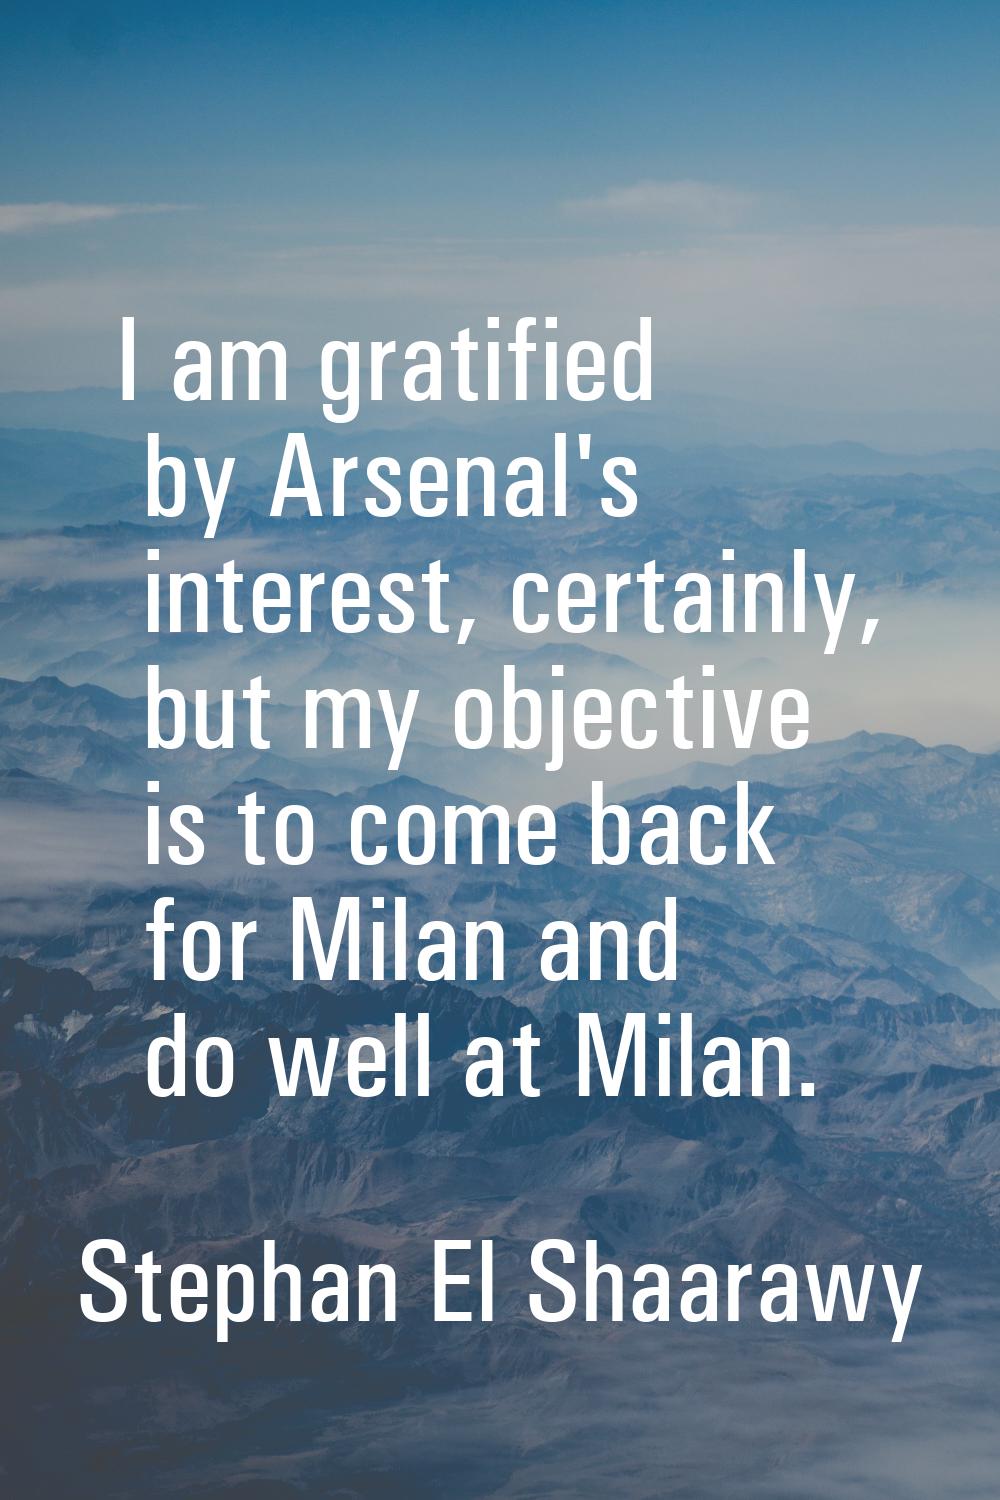 I am gratified by Arsenal's interest, certainly, but my objective is to come back for Milan and do 